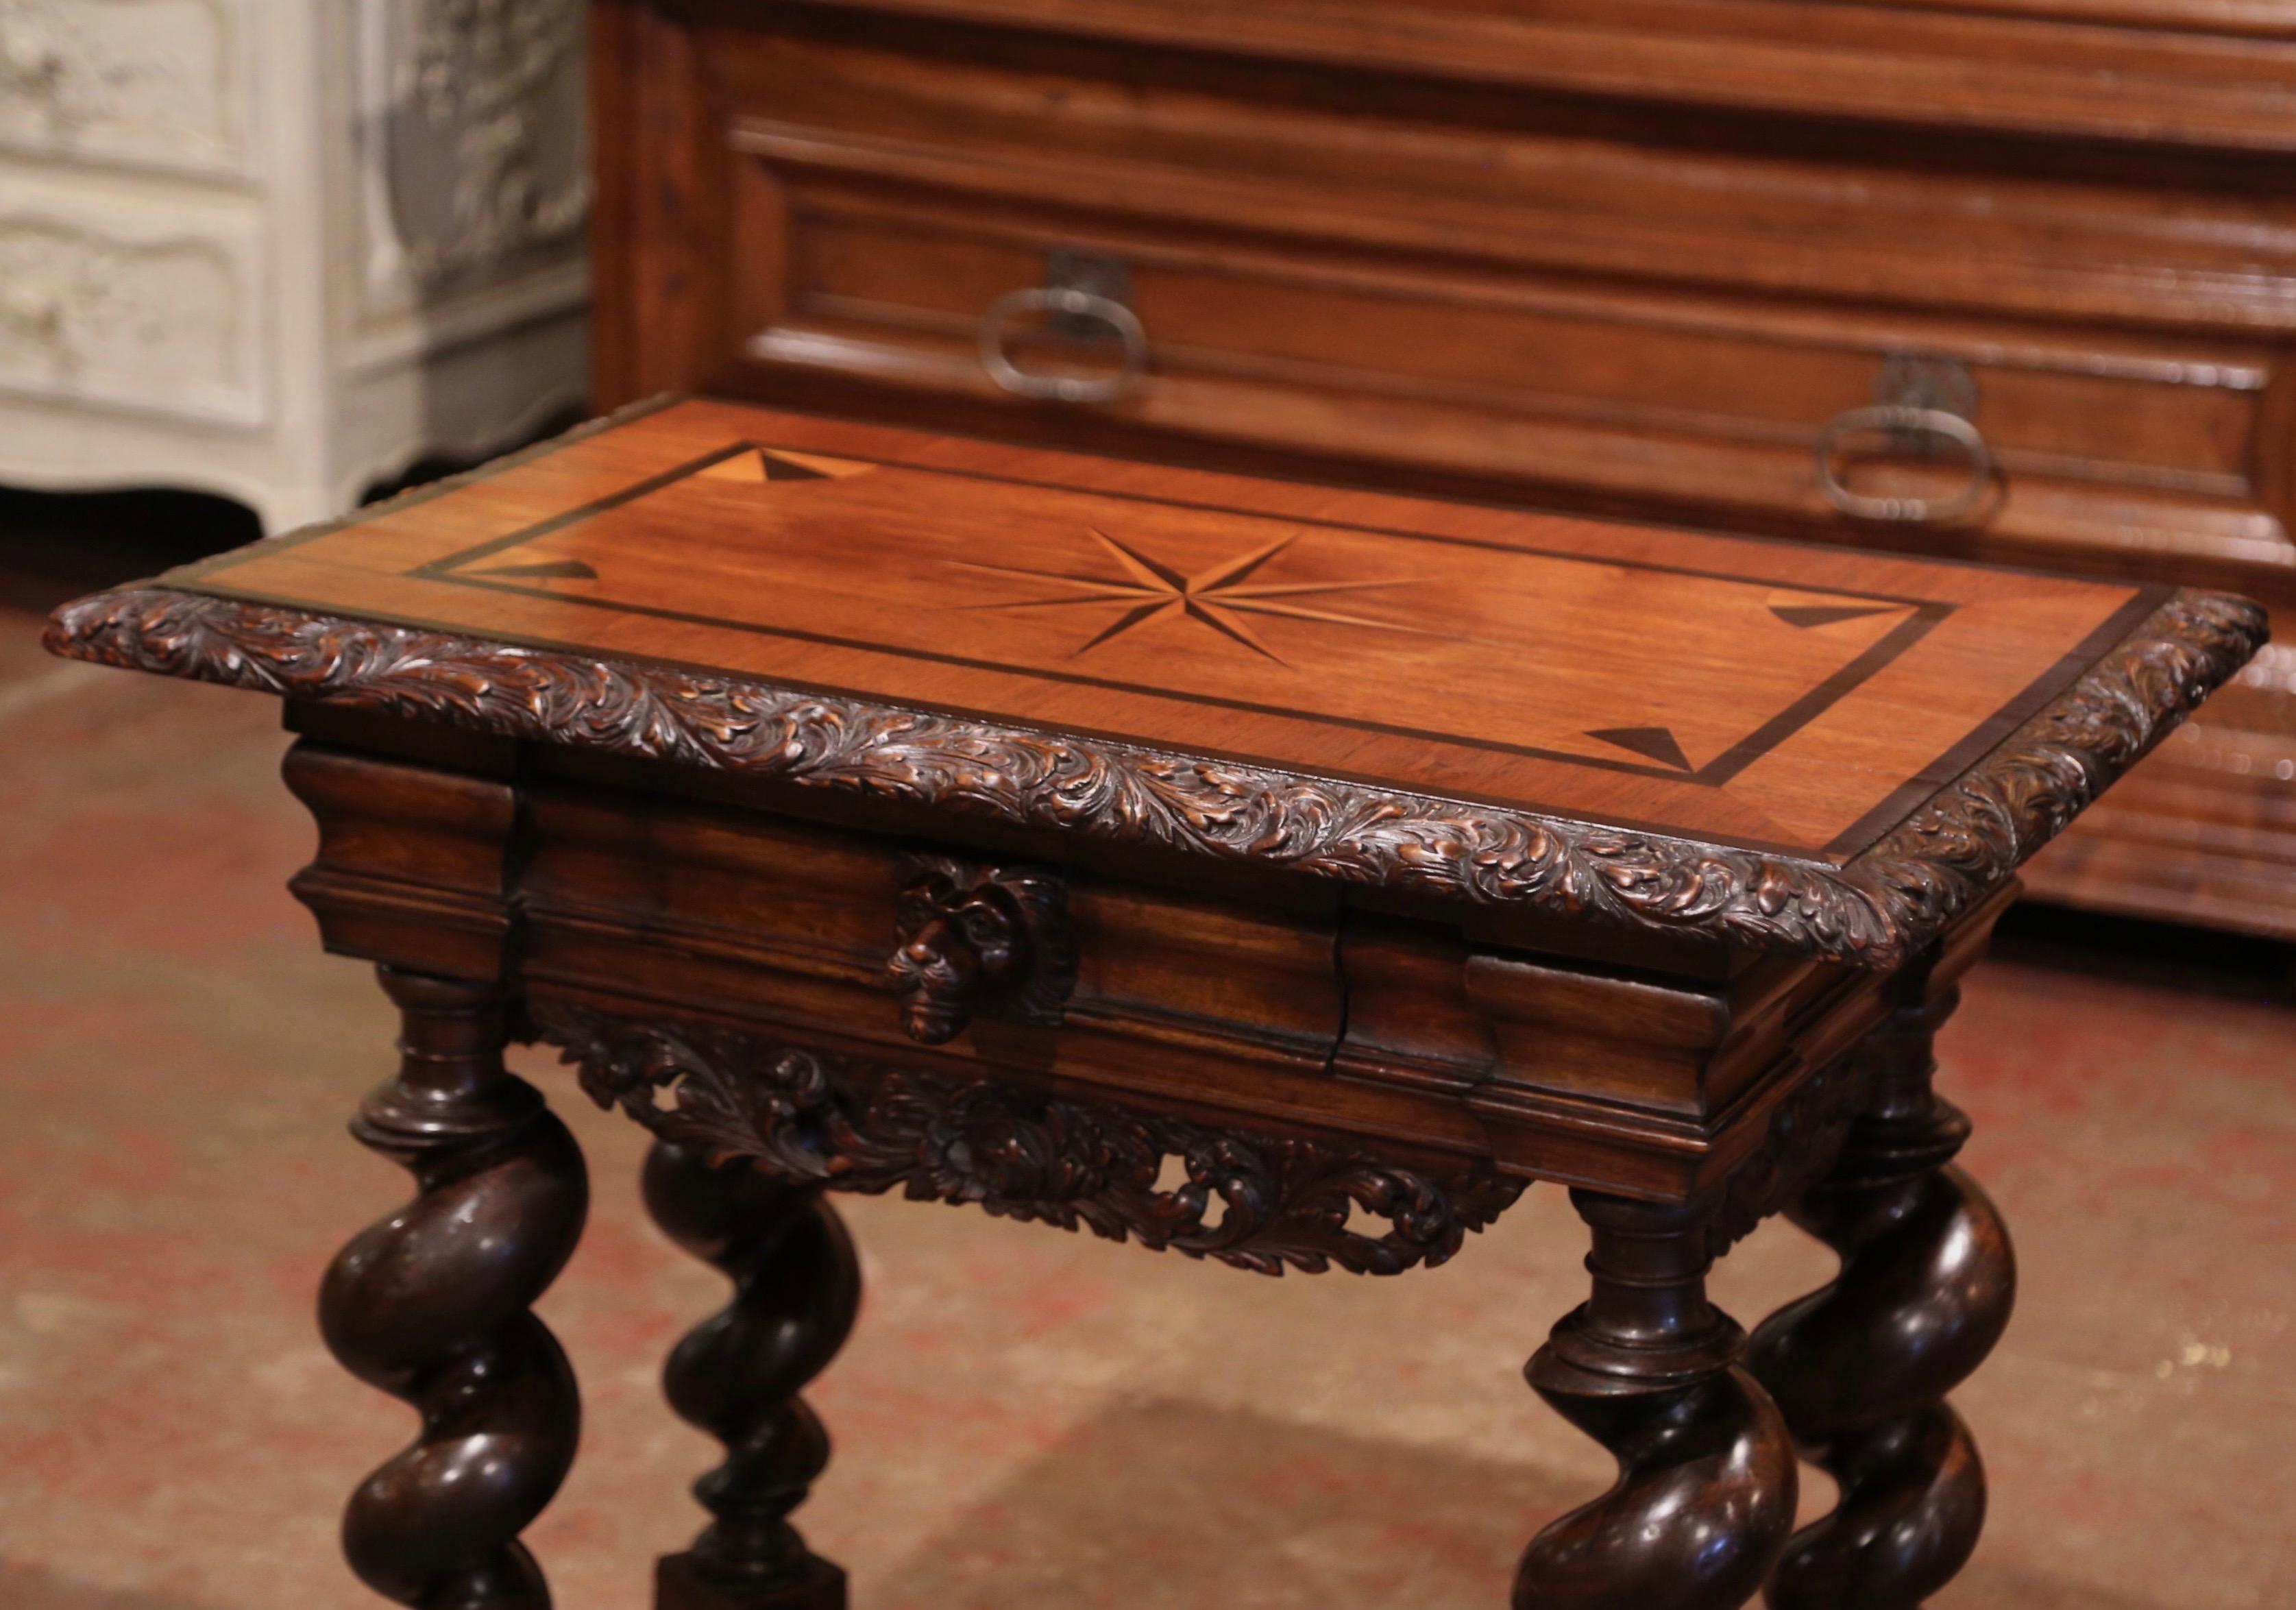 Crafted in Italy, circa 1860, the elegant side table stands on barley twist legs connected with an elaborate X-stretcher at the base and embellished with central round finial. The antique table features a single drawer decorated with a carved lion